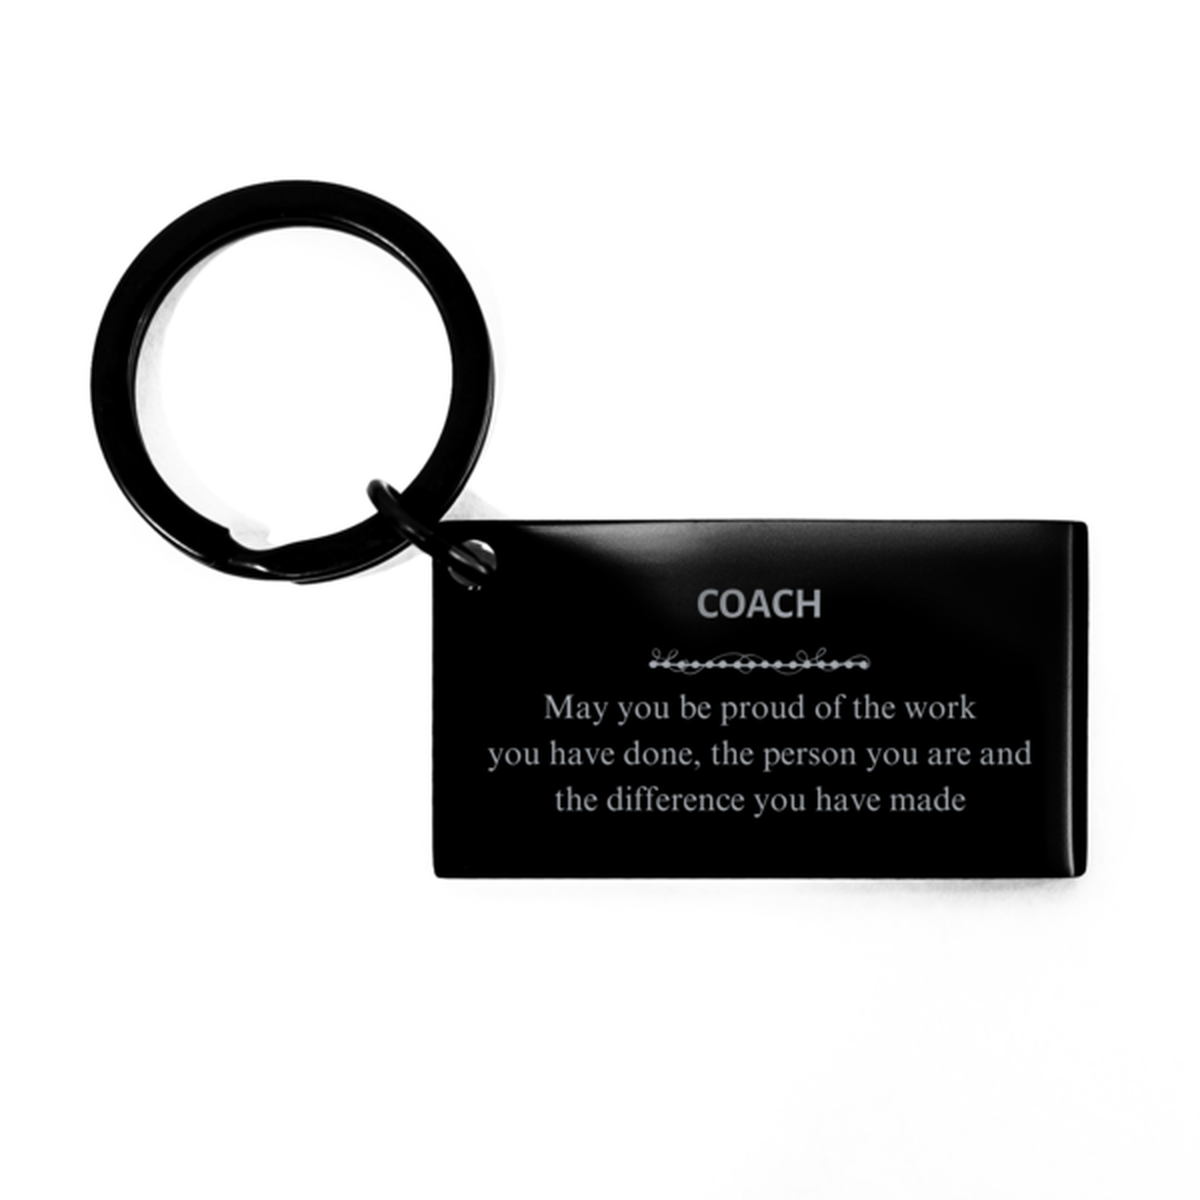 Drug Counselor May you be proud of the work you have done, Retirement Coach Keychain for Colleague Appreciation Gifts Amazing for Coach